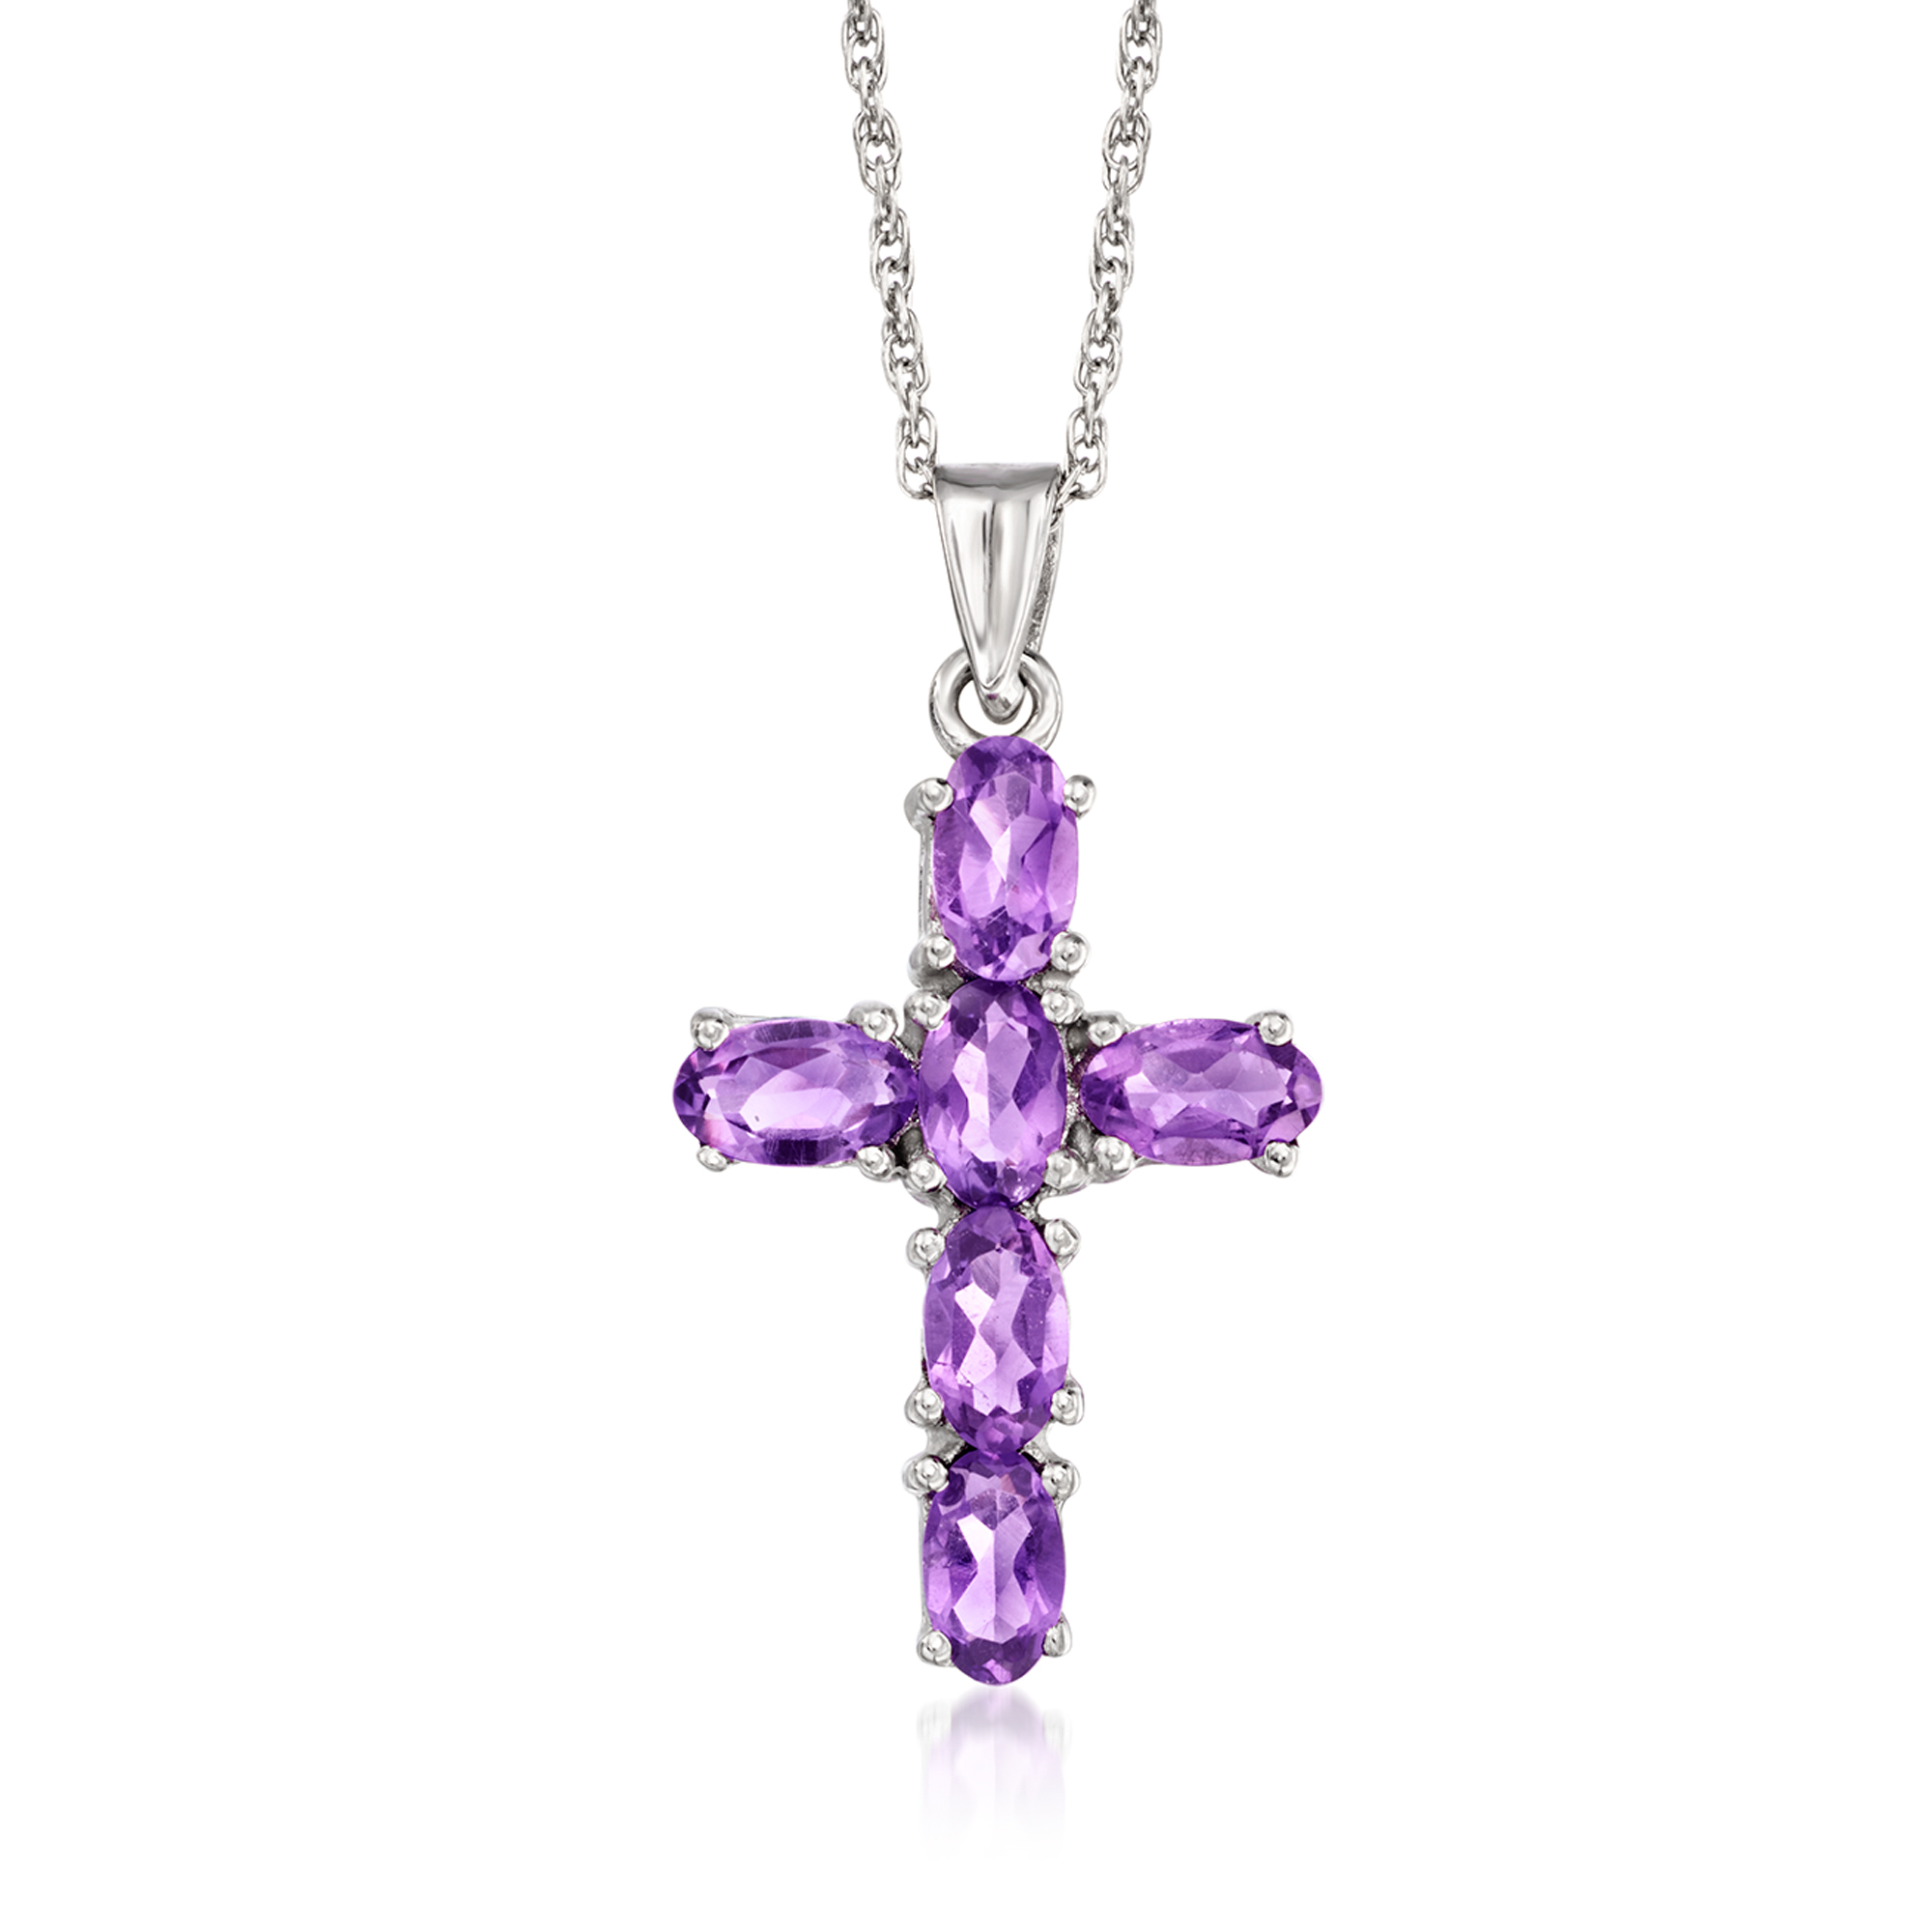 18-Inch Rhodium Plated Necklace with 6mm Light Amethyst Birthstone Beads and Sterling Silver Crucifix Charm.